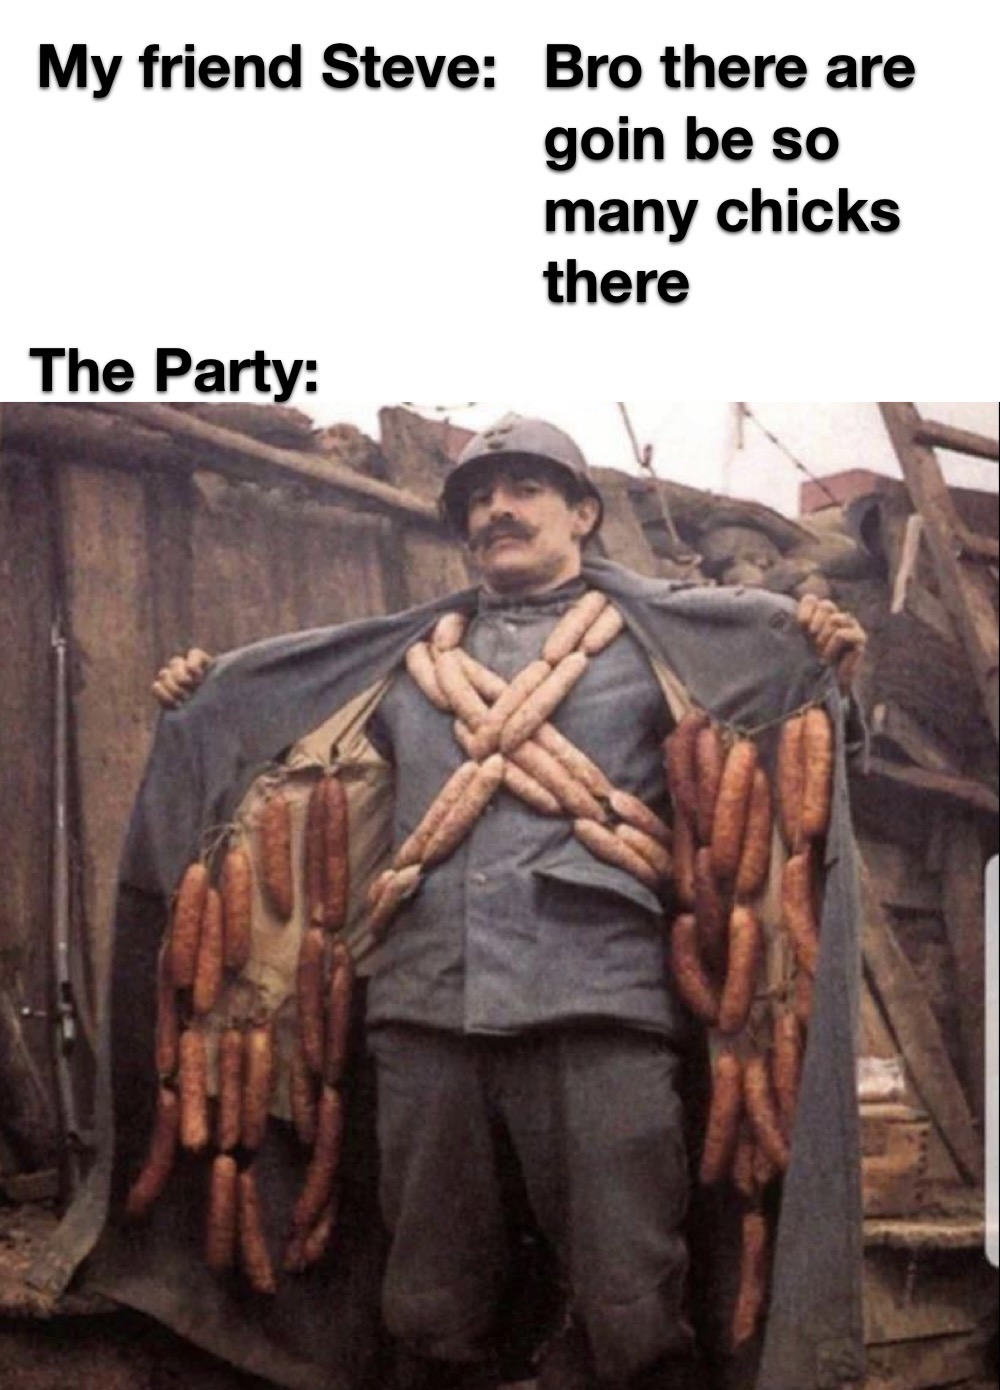 french soldier sausage - My friend Steve Bro there are goin be so many chicks there The Party